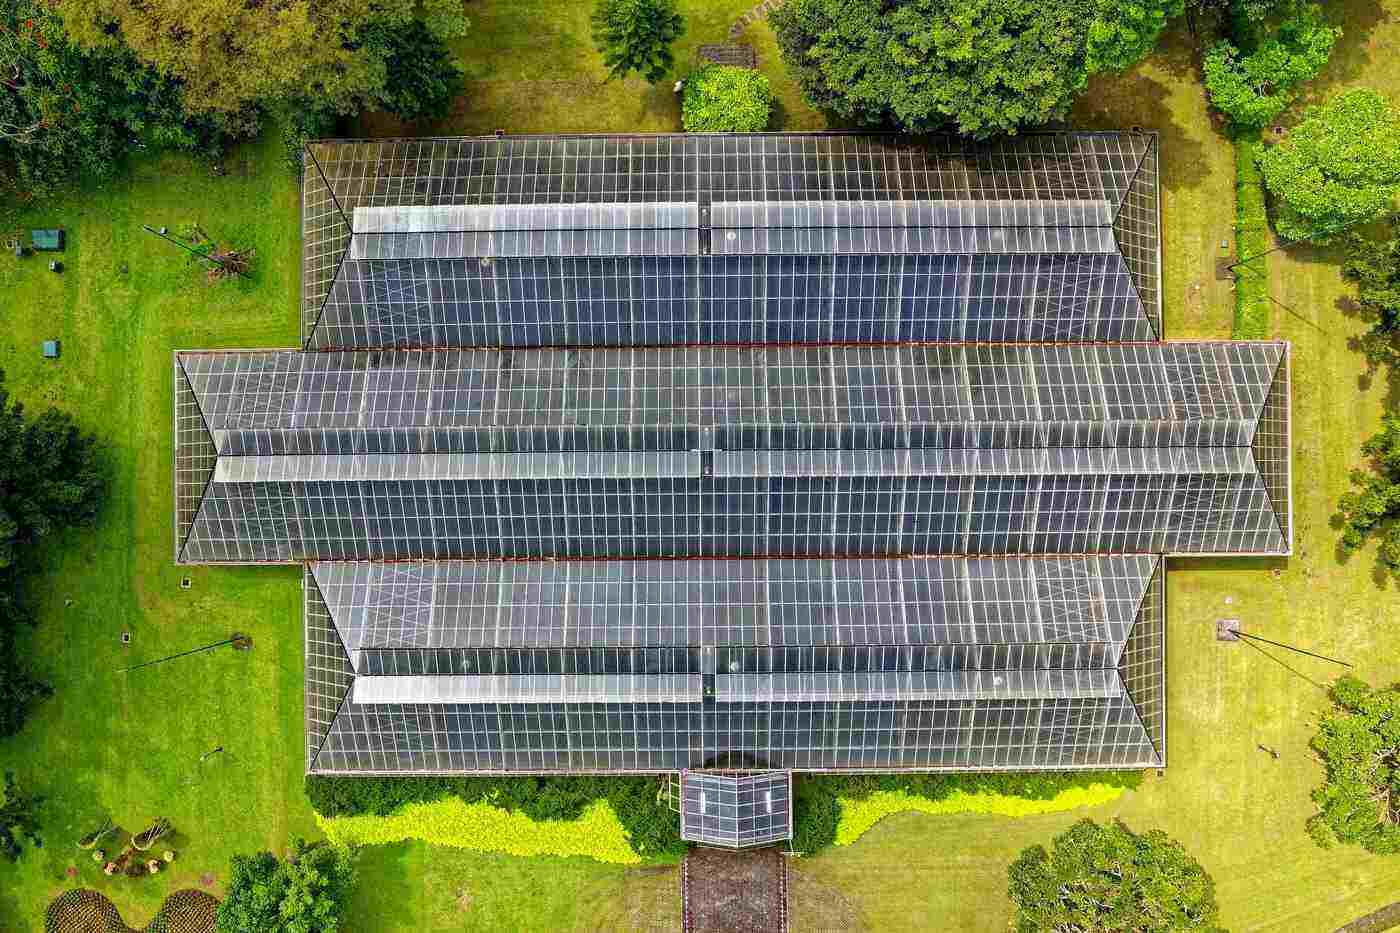 Bird's eye view of solar roof - what an engineering freshman needs to know about renewable energy